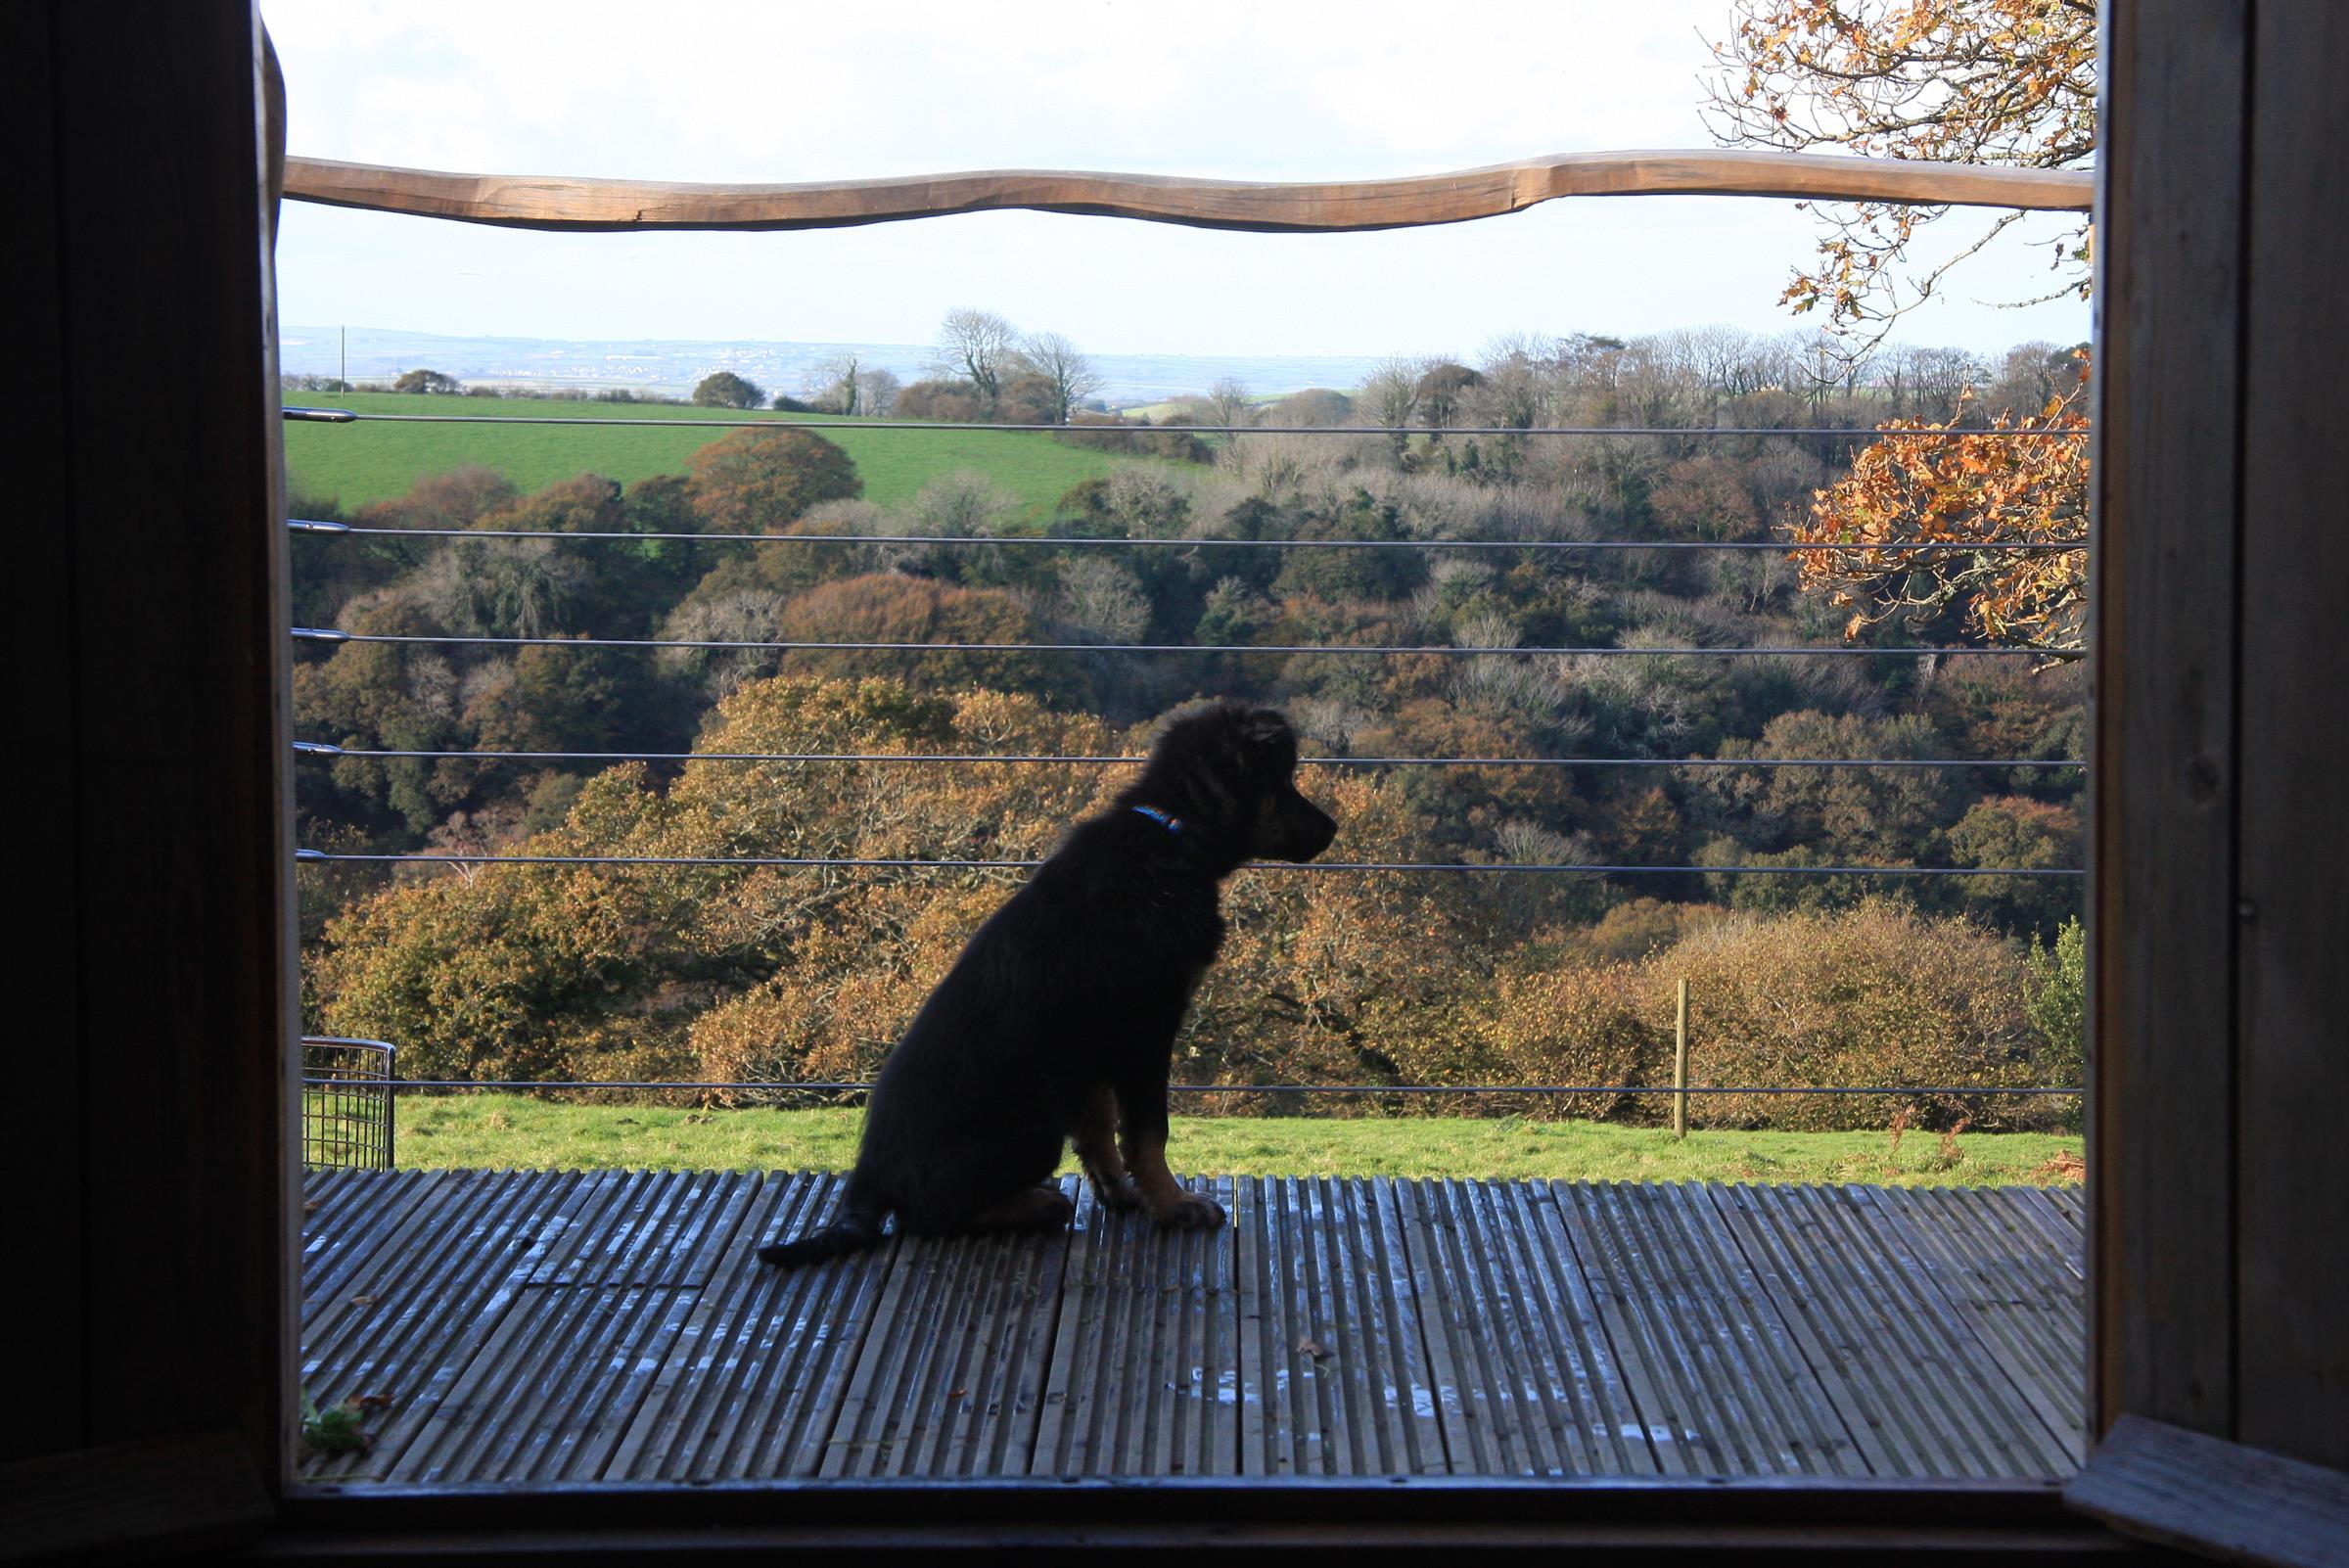 Dog friendly yurt with a beautiful view.